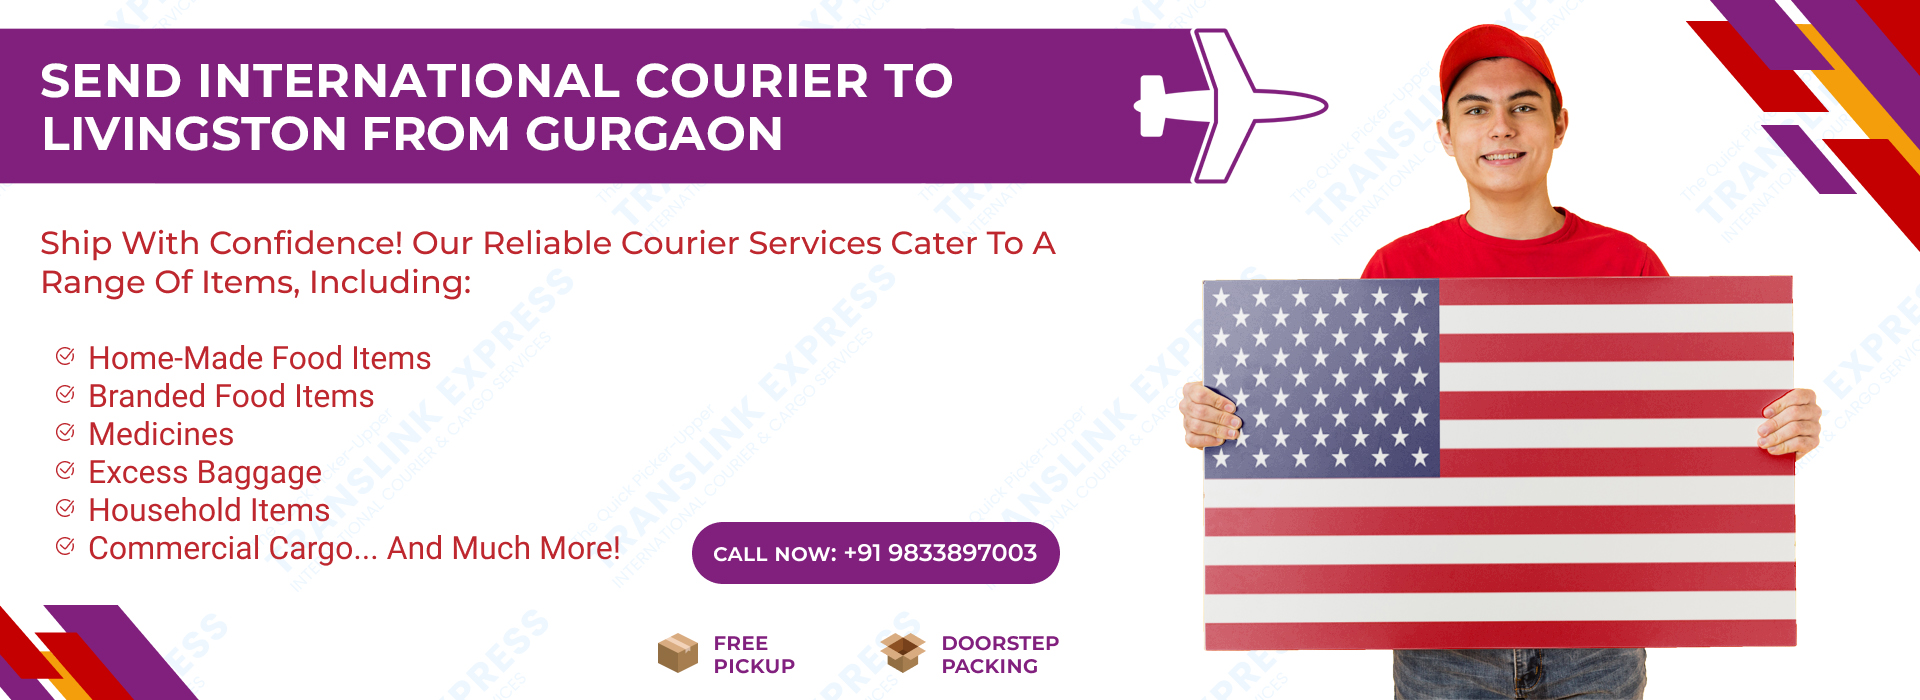 Courier to Livingston From Gurgaon